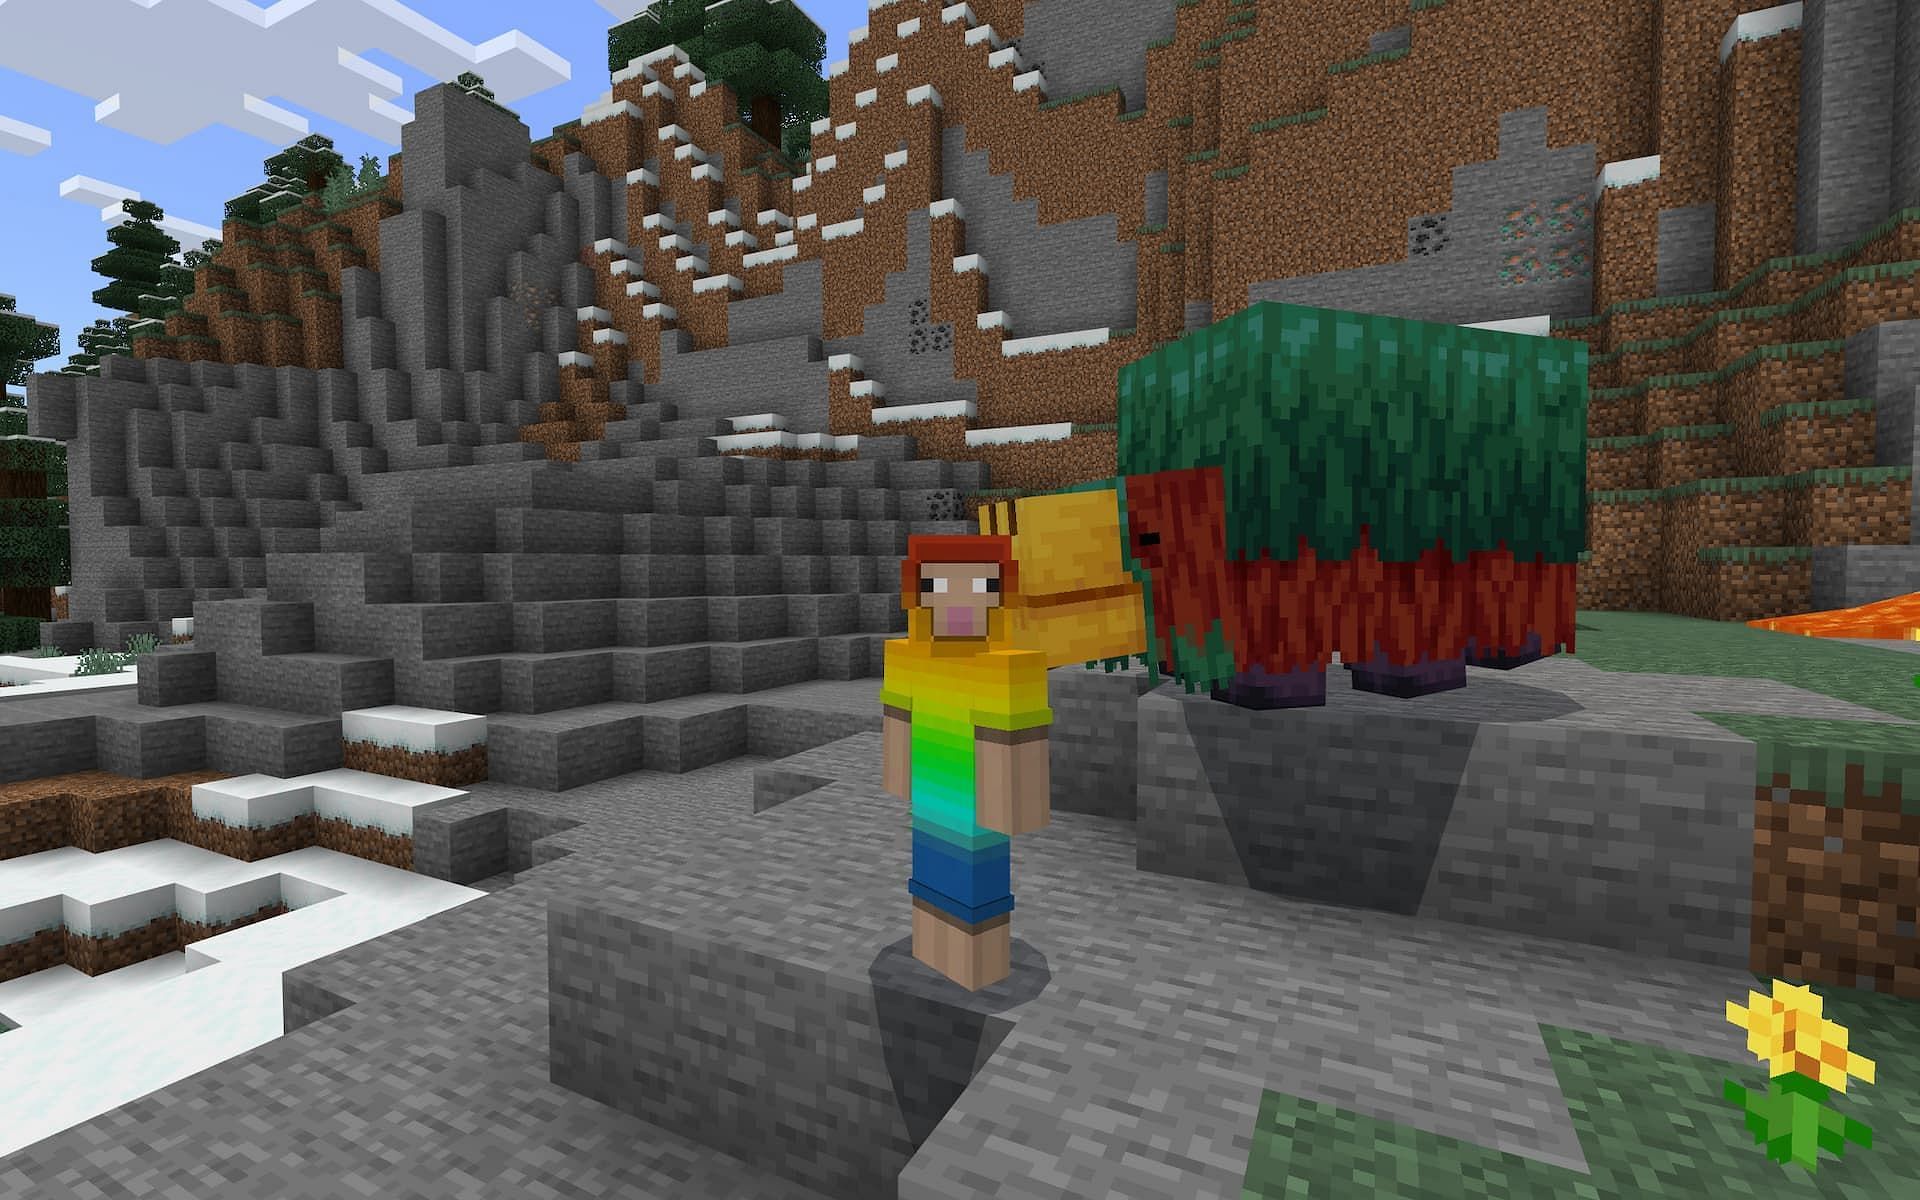 In Minecraft, a rainbow sheep avatar stands in front of a sniffer mob in front of a mountain.